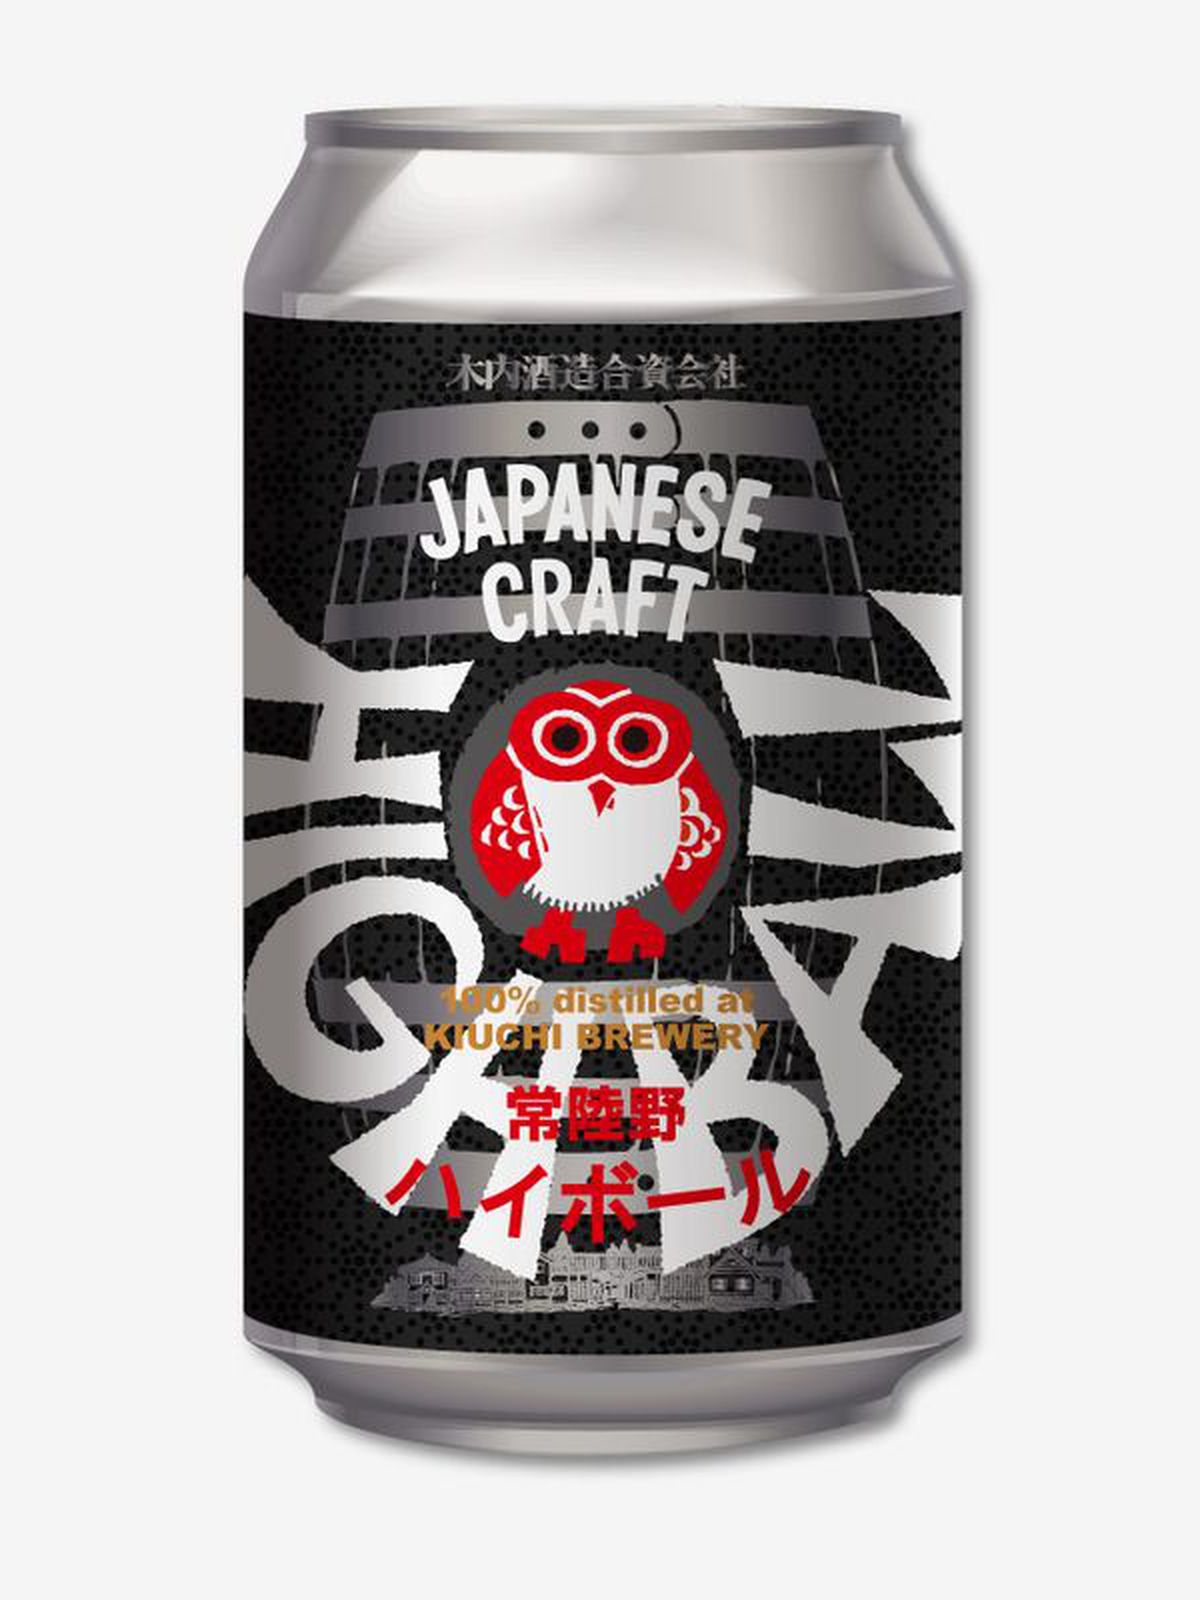 Hitachino highball canned cocktail